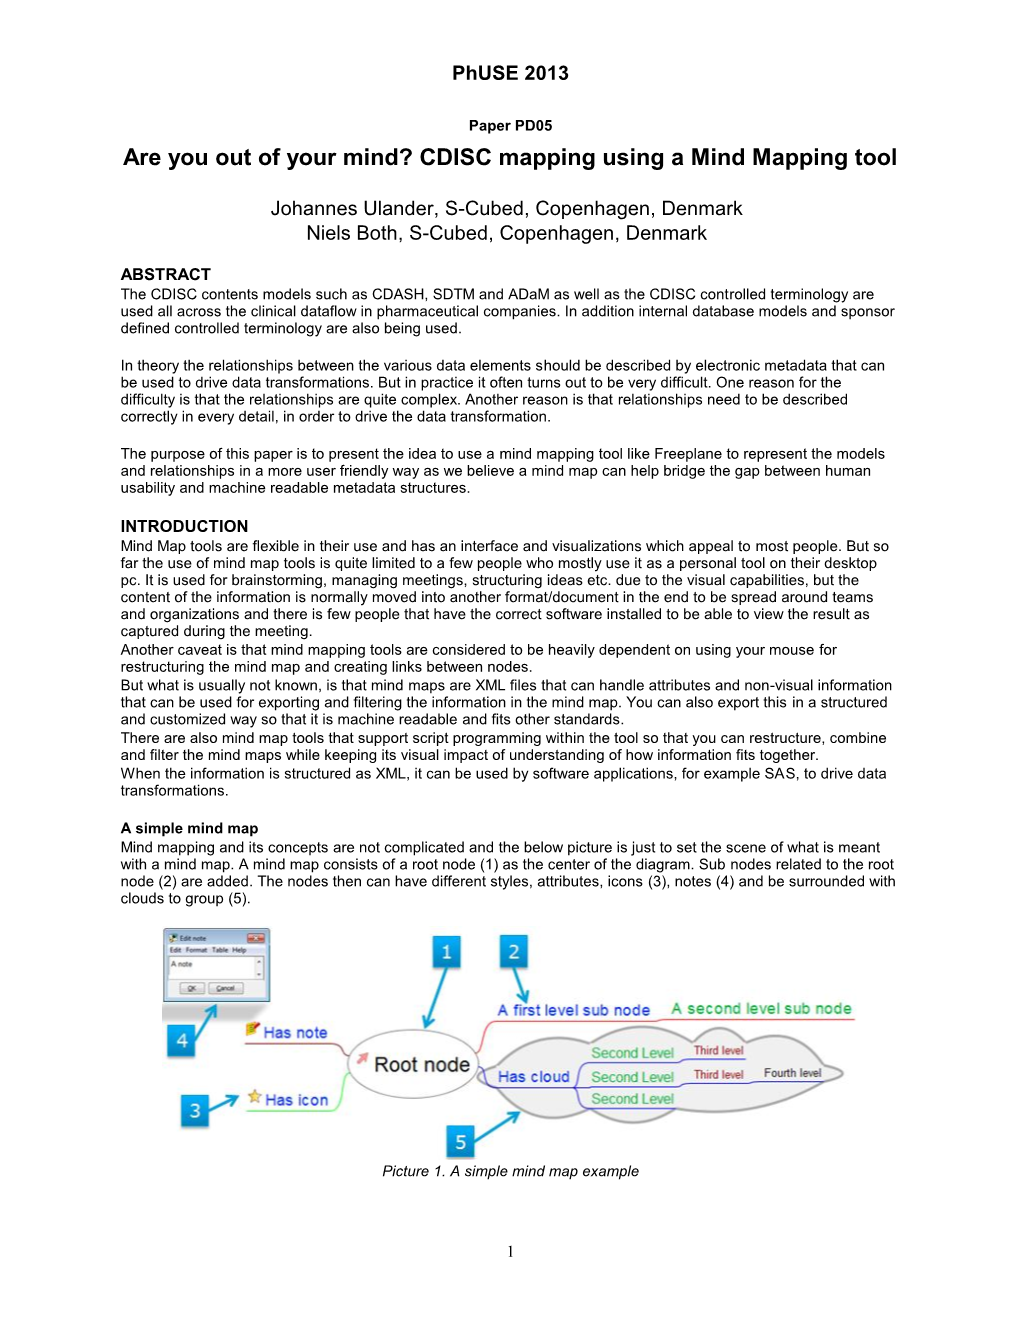 CDISC Mapping Using a Mind Mapping Tool